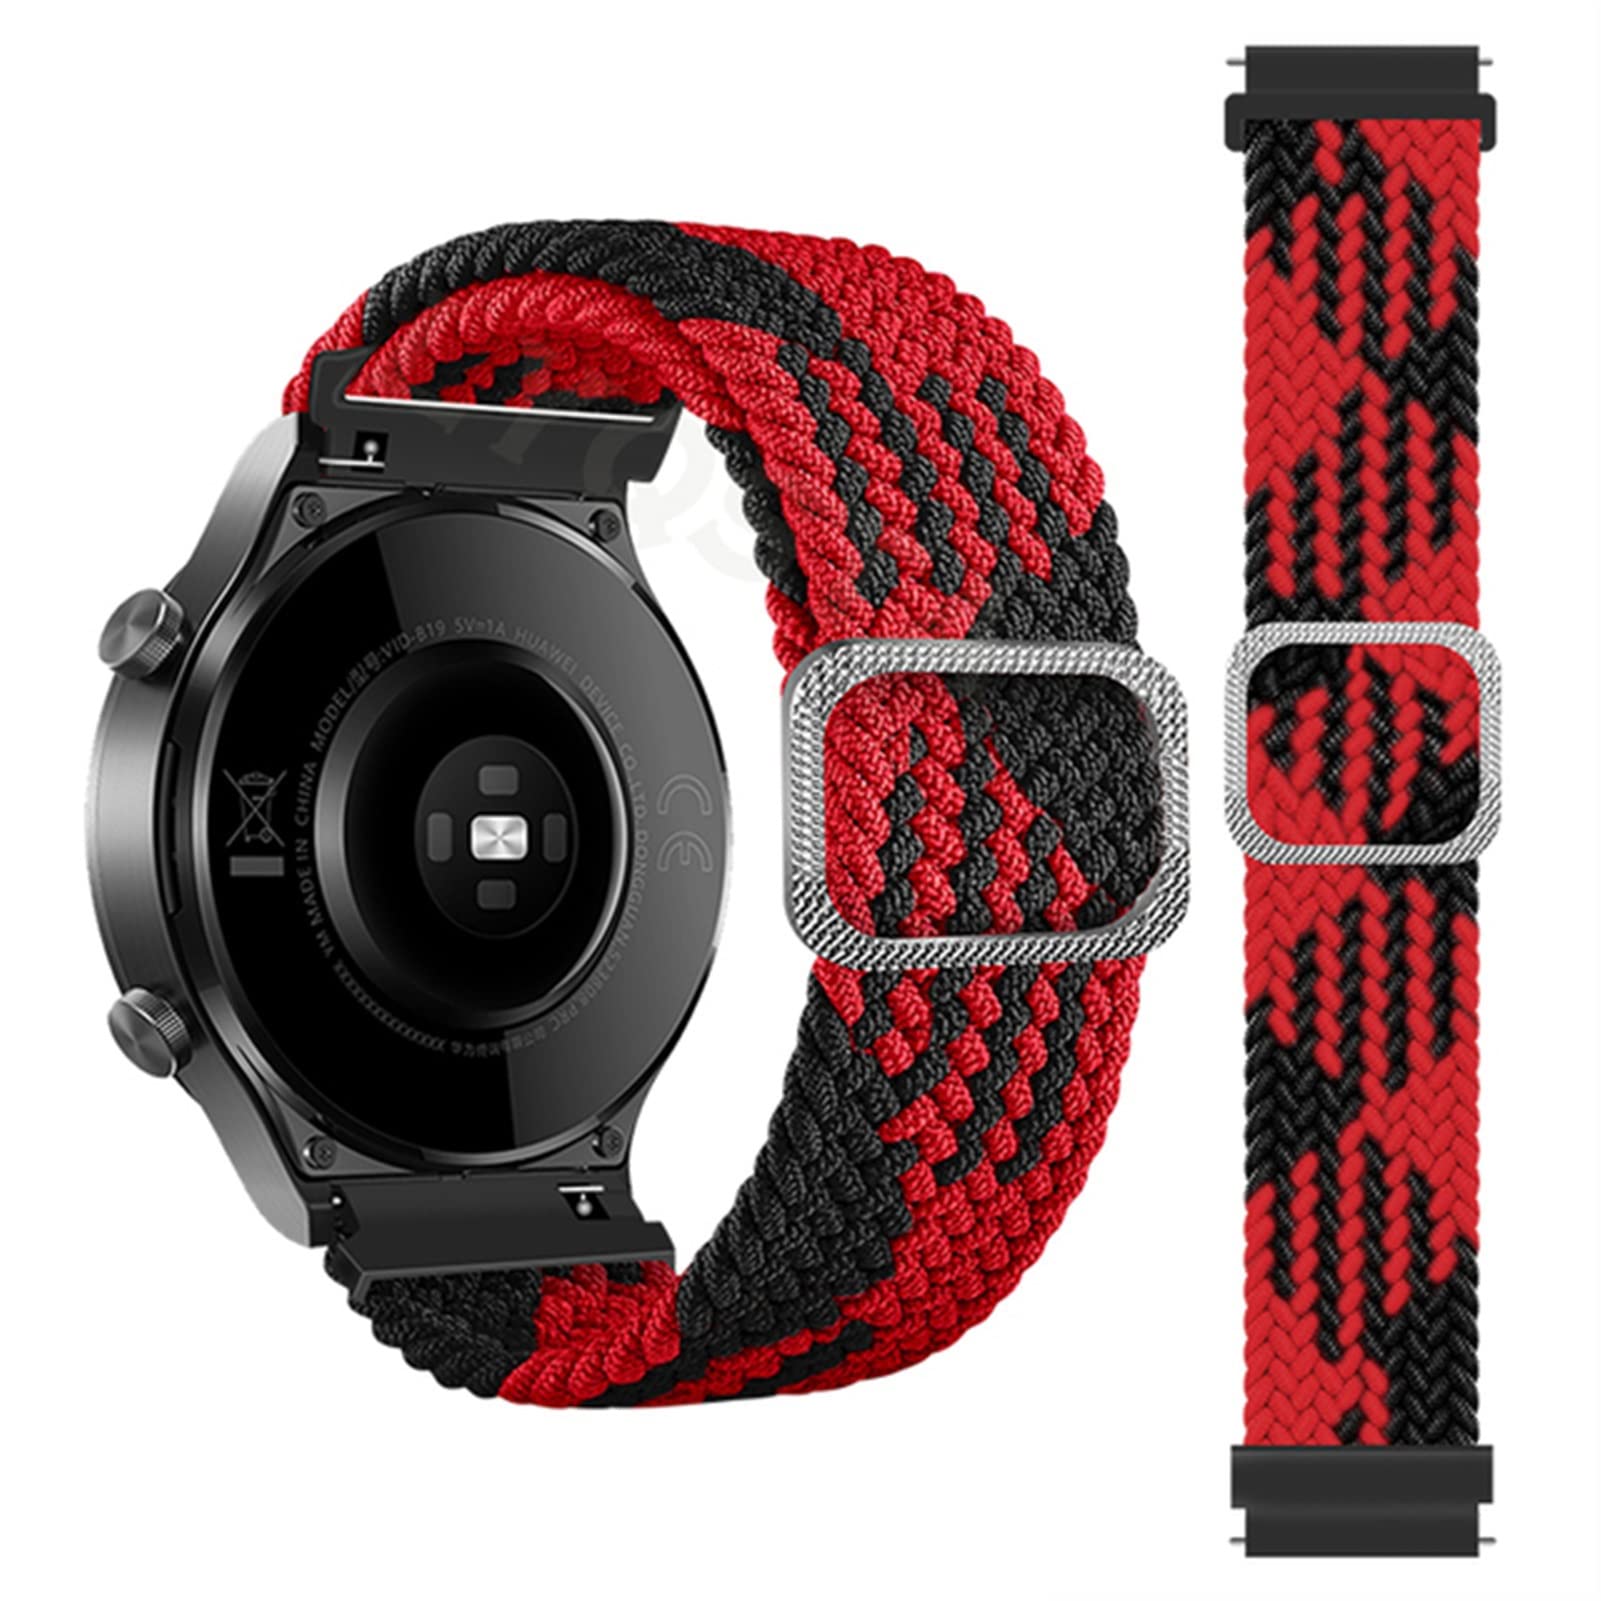 Wscebck Braided Correa Wrist Strap Bands for COROS APEX Pro/APEX 46 42mm Smartwatch Watchband PACE 2 PACE2 Bracelet Correa (Color : Red and Black, Size : for COROS PACE 2)